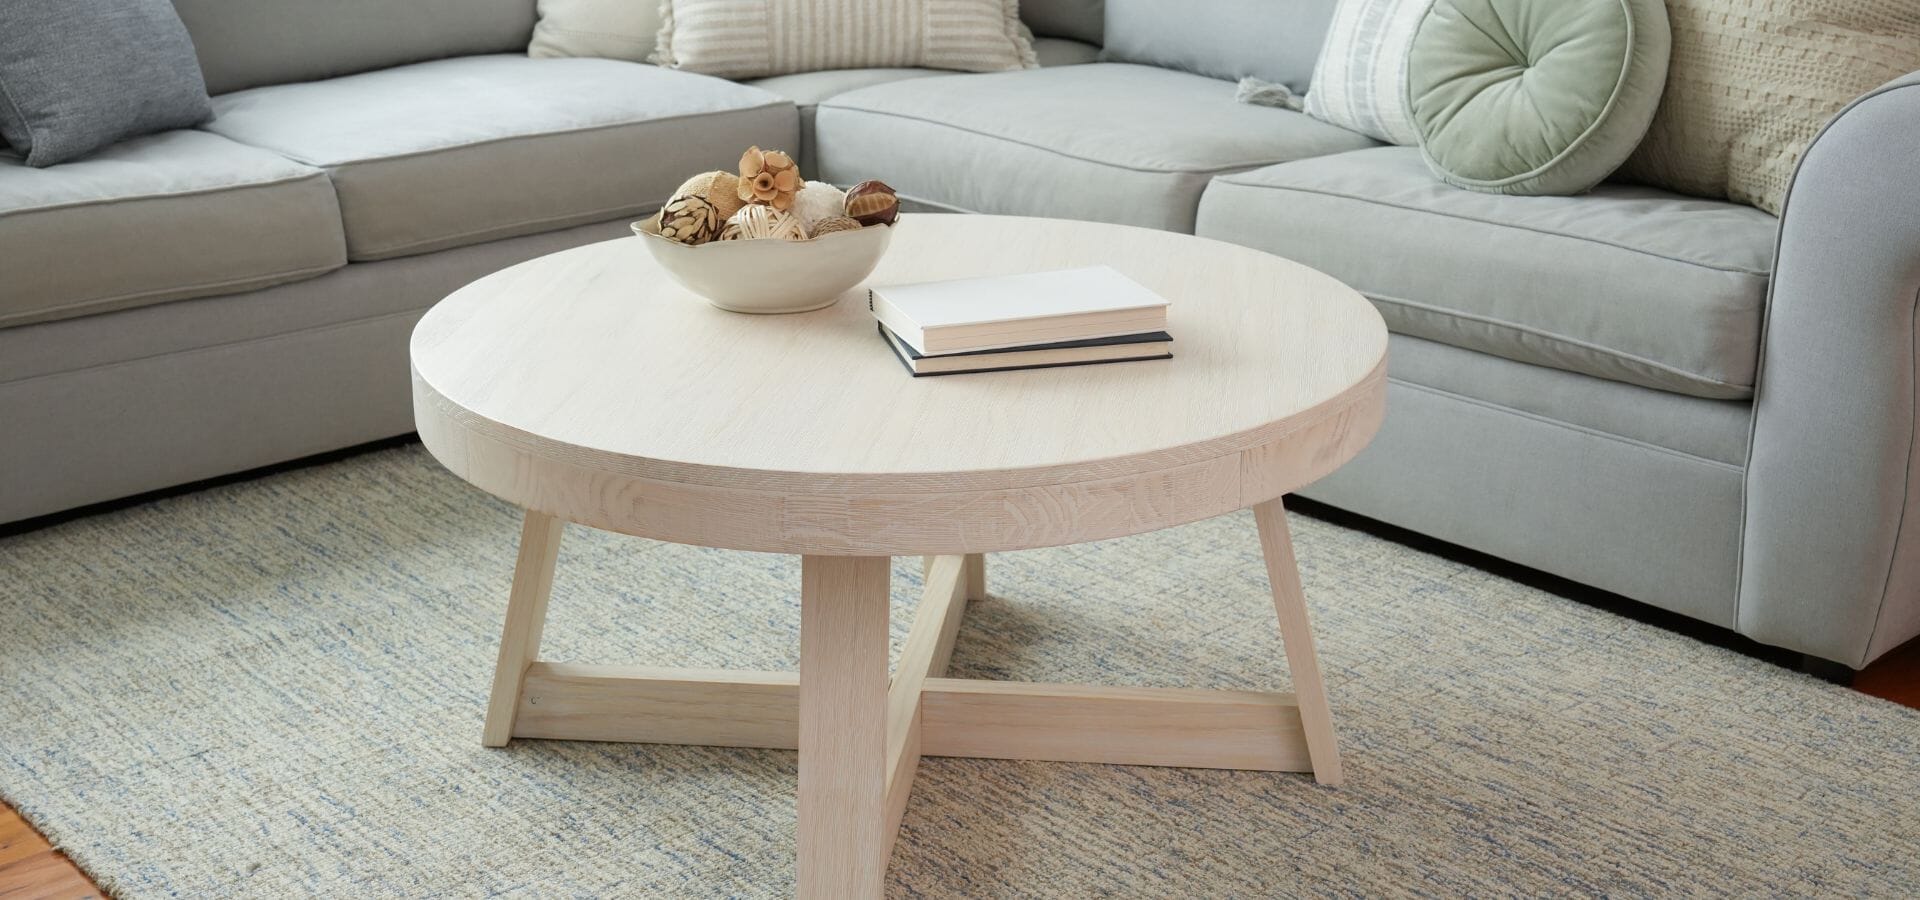 How to Choose a Coffee Table